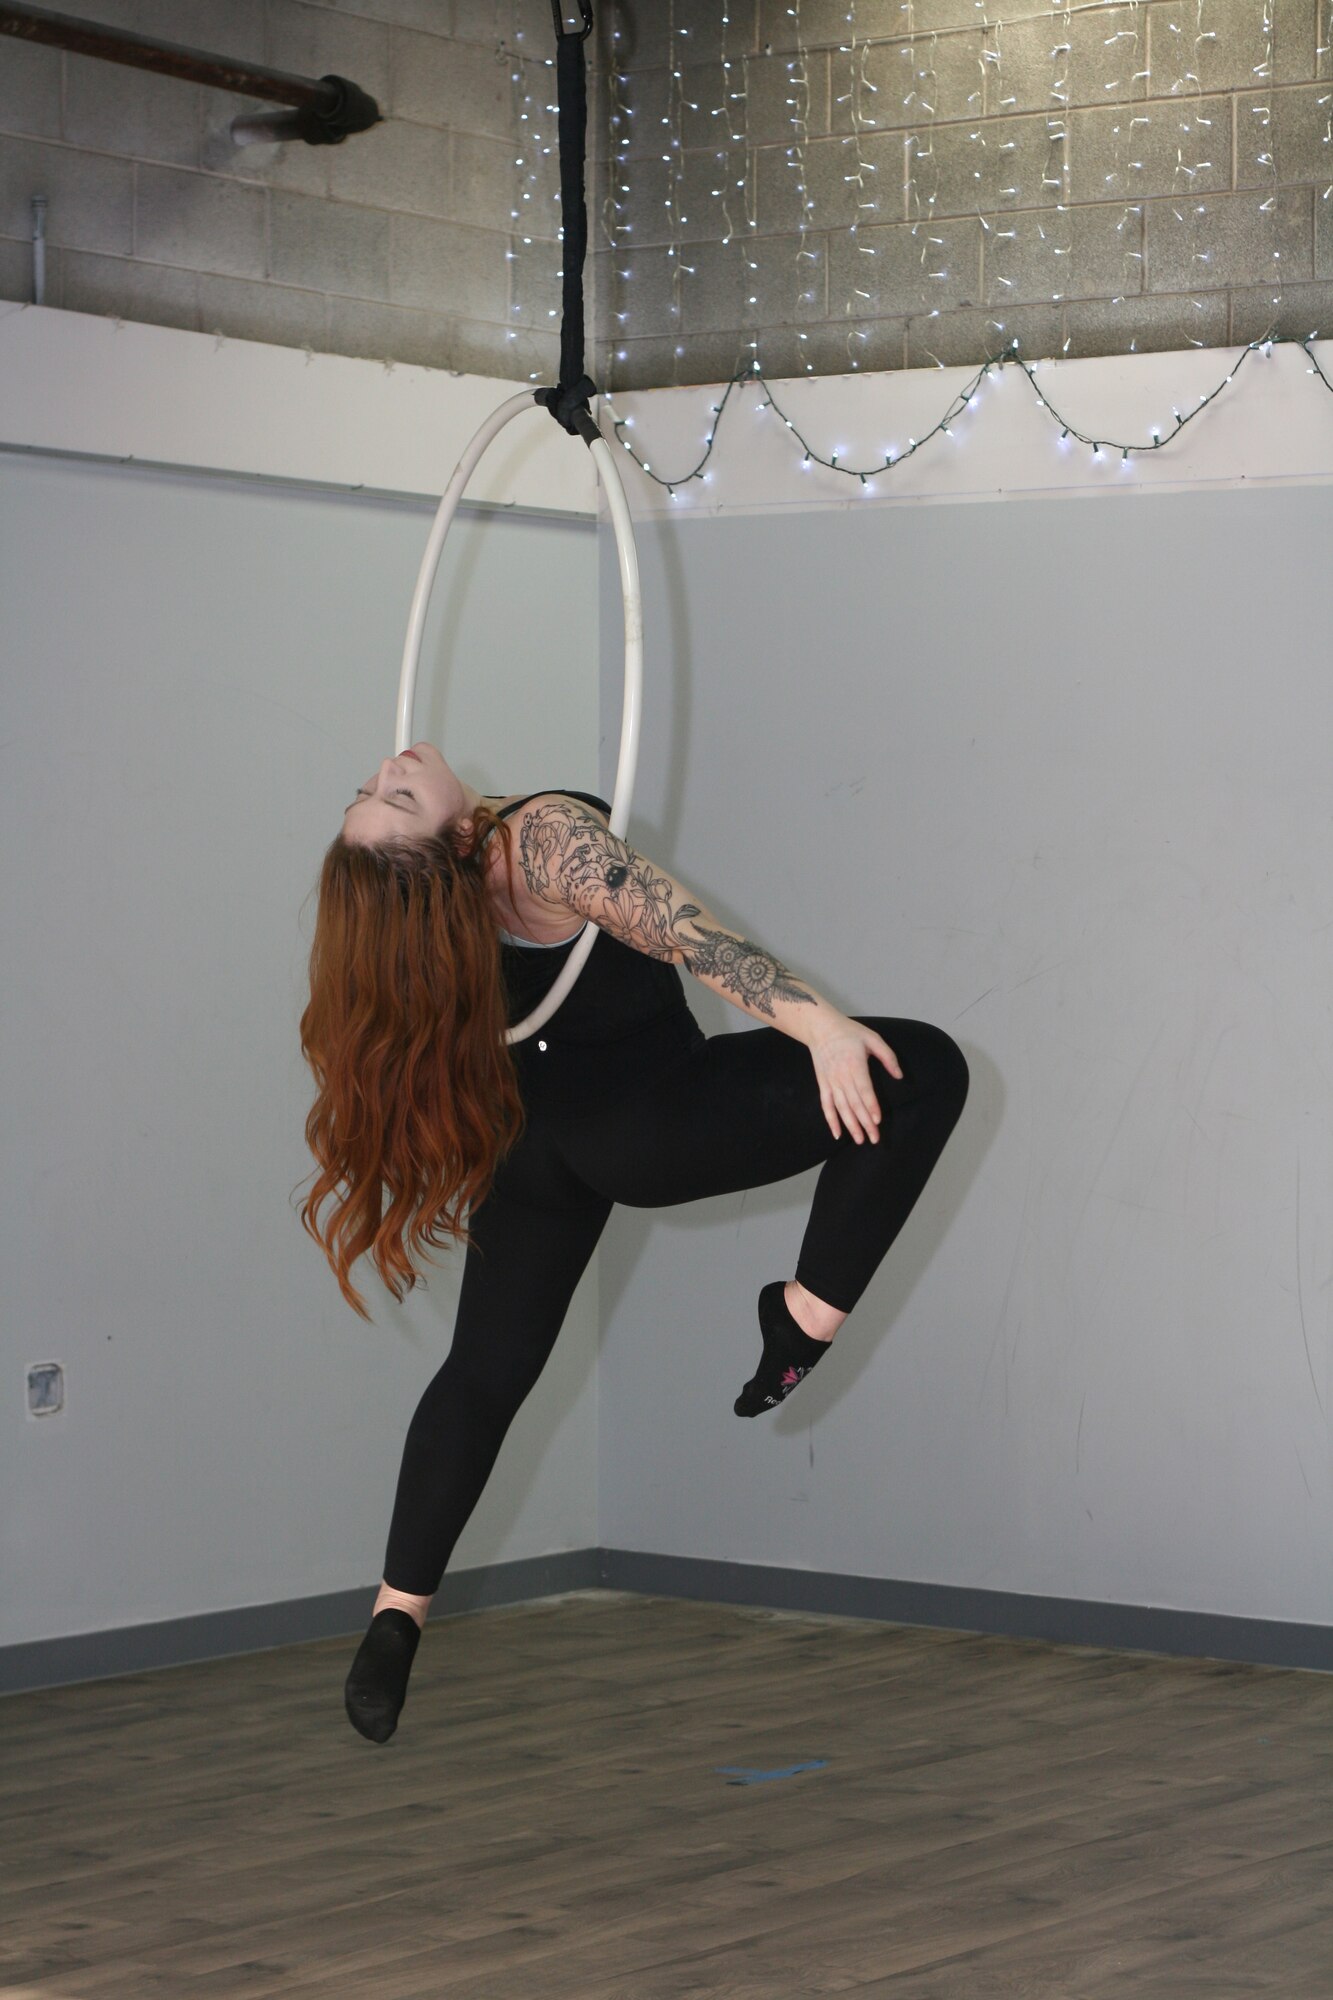 Staff Sgt. Rachel Loftis, a public affairs specialist with the 193rd Special Operations Wing, Middletown, Pa., completes a lyra workout, also known as aerial hoop - the art of performing acrobatics using a hoop connected to the ceiling. Loftis first pursued aerial acrobatics while stationed at Nellis Air Force Base, Las Vegas, which she attributes to the robust local “circus community” there and the desire to find a fitness program that was effective and held her interest. (U.S. Air National Guard photo by Tech. Sgt. Claire Forbes)